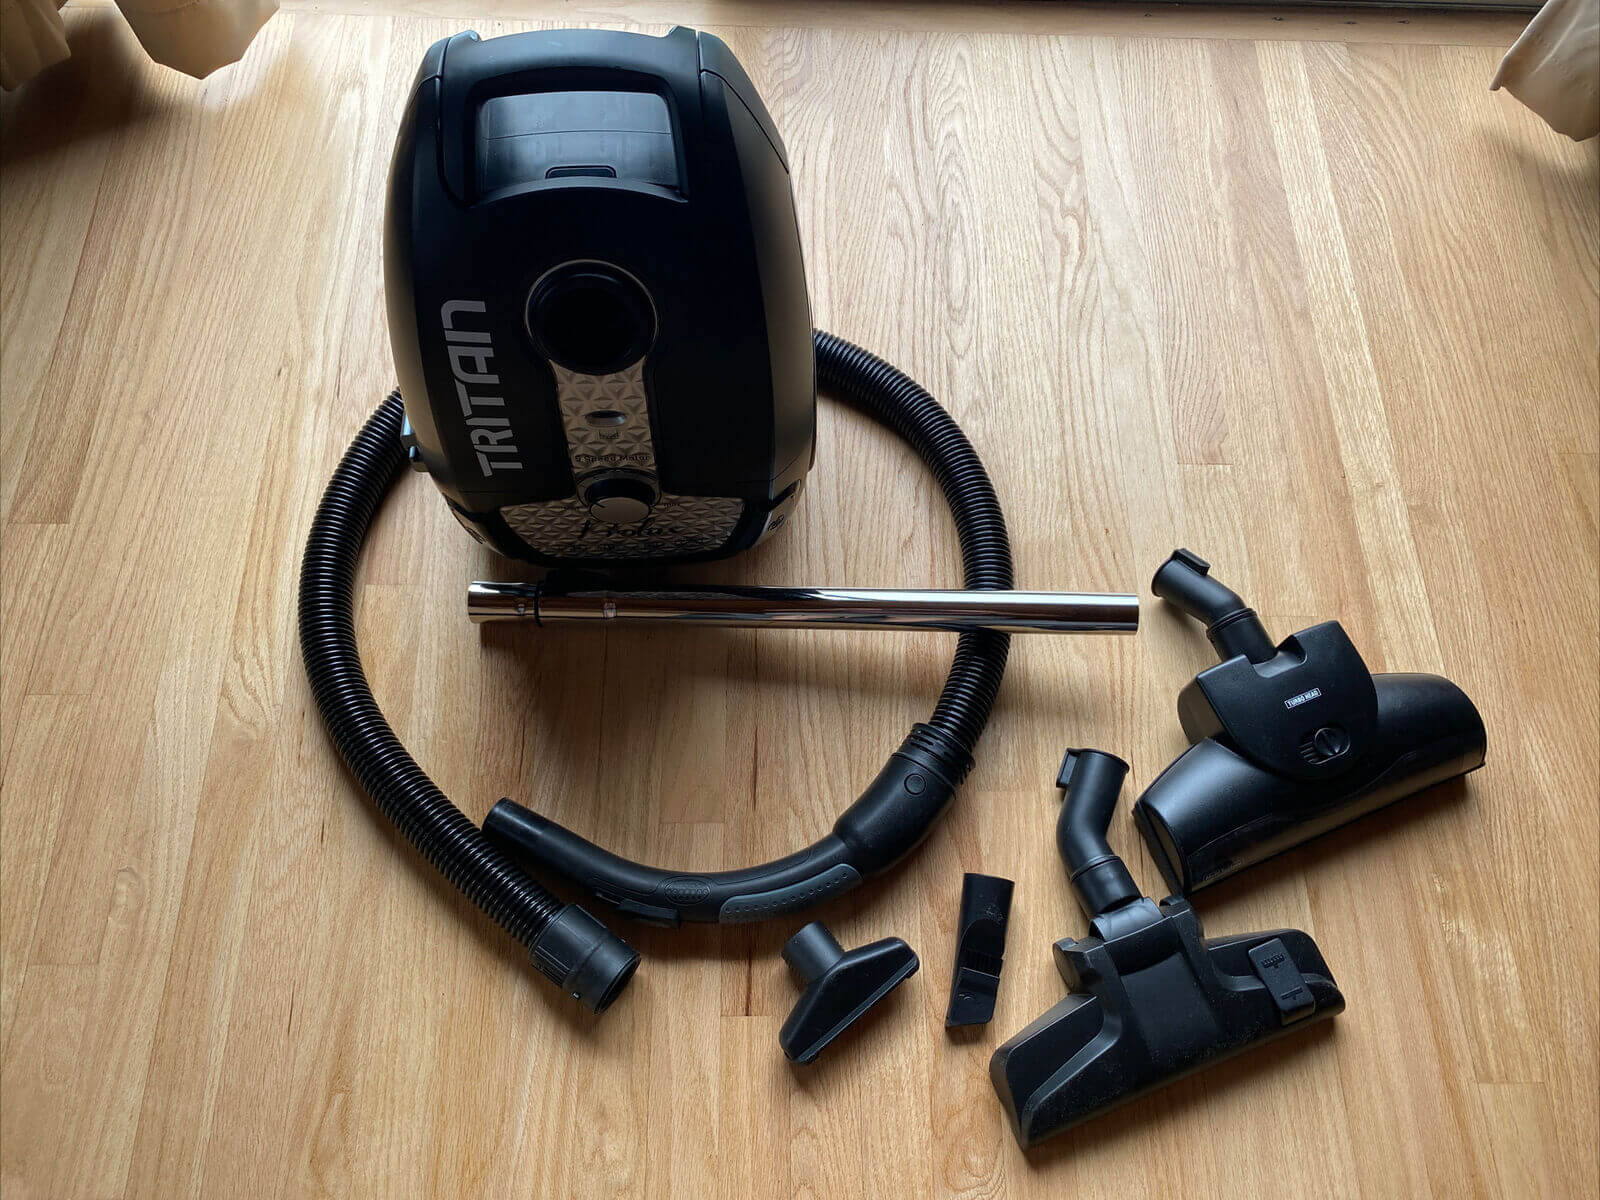 Top 4 Canister Vacuums With Powerhead